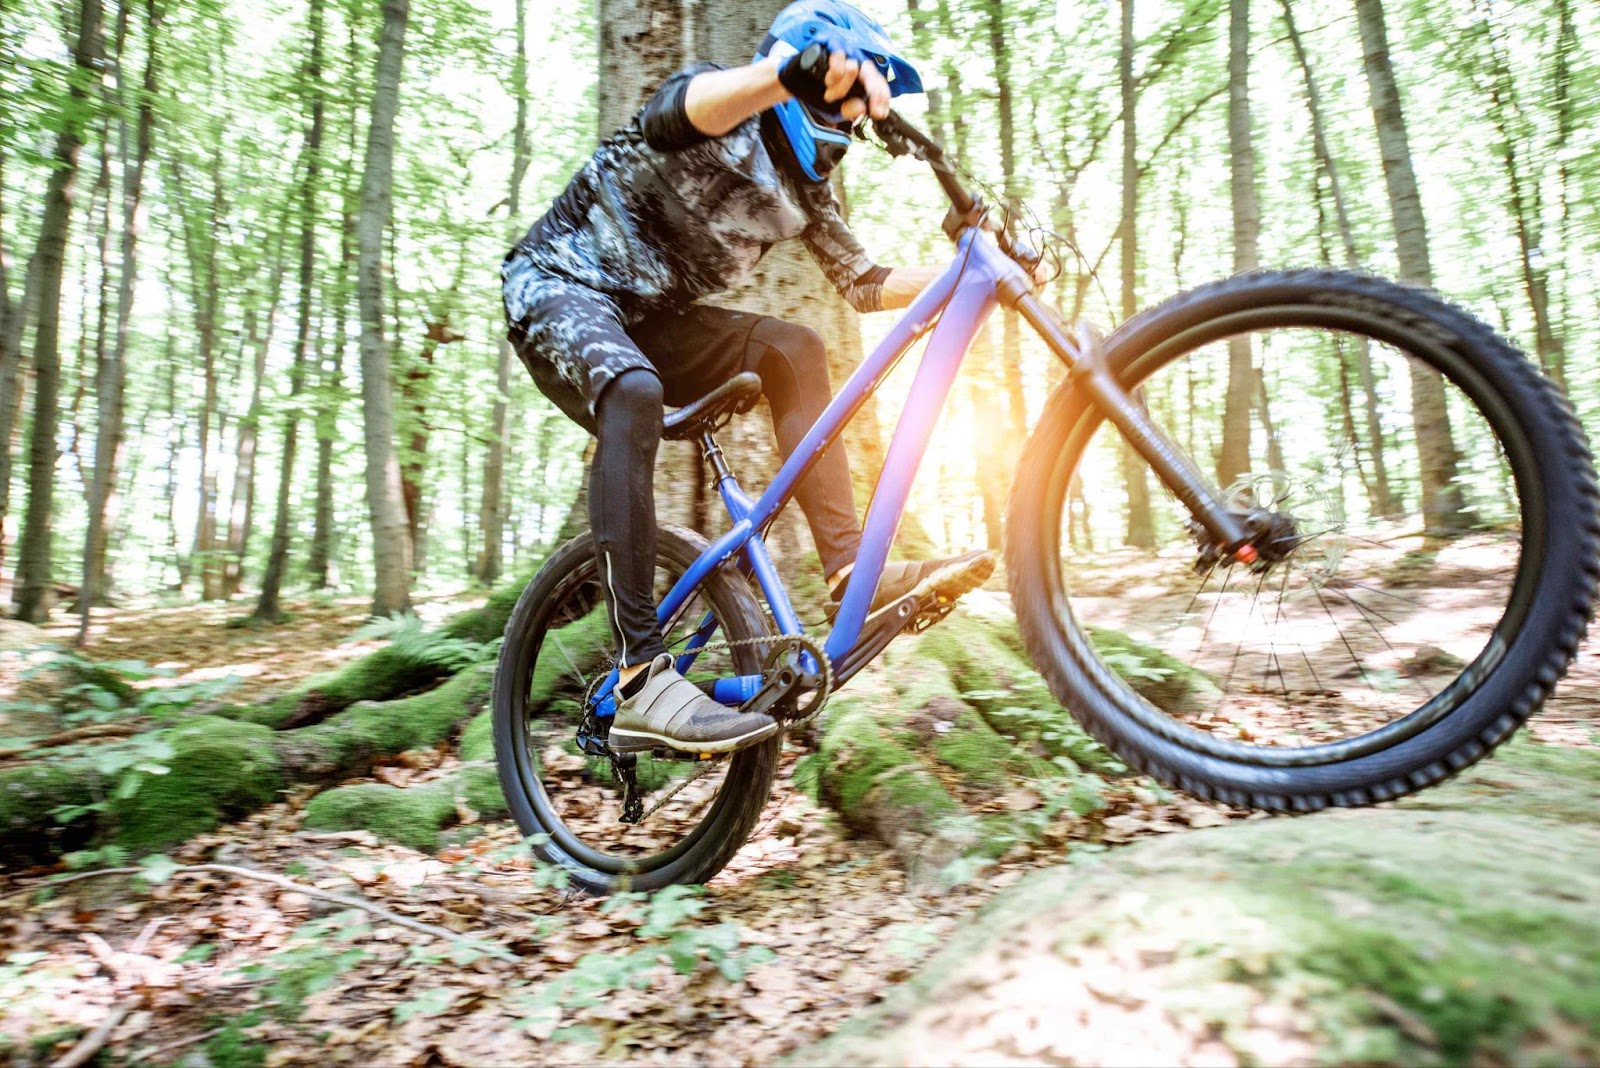 A cross-country mountain bike rider in the woods, showing the lightweight design important for how to choose a mountain bike for racing